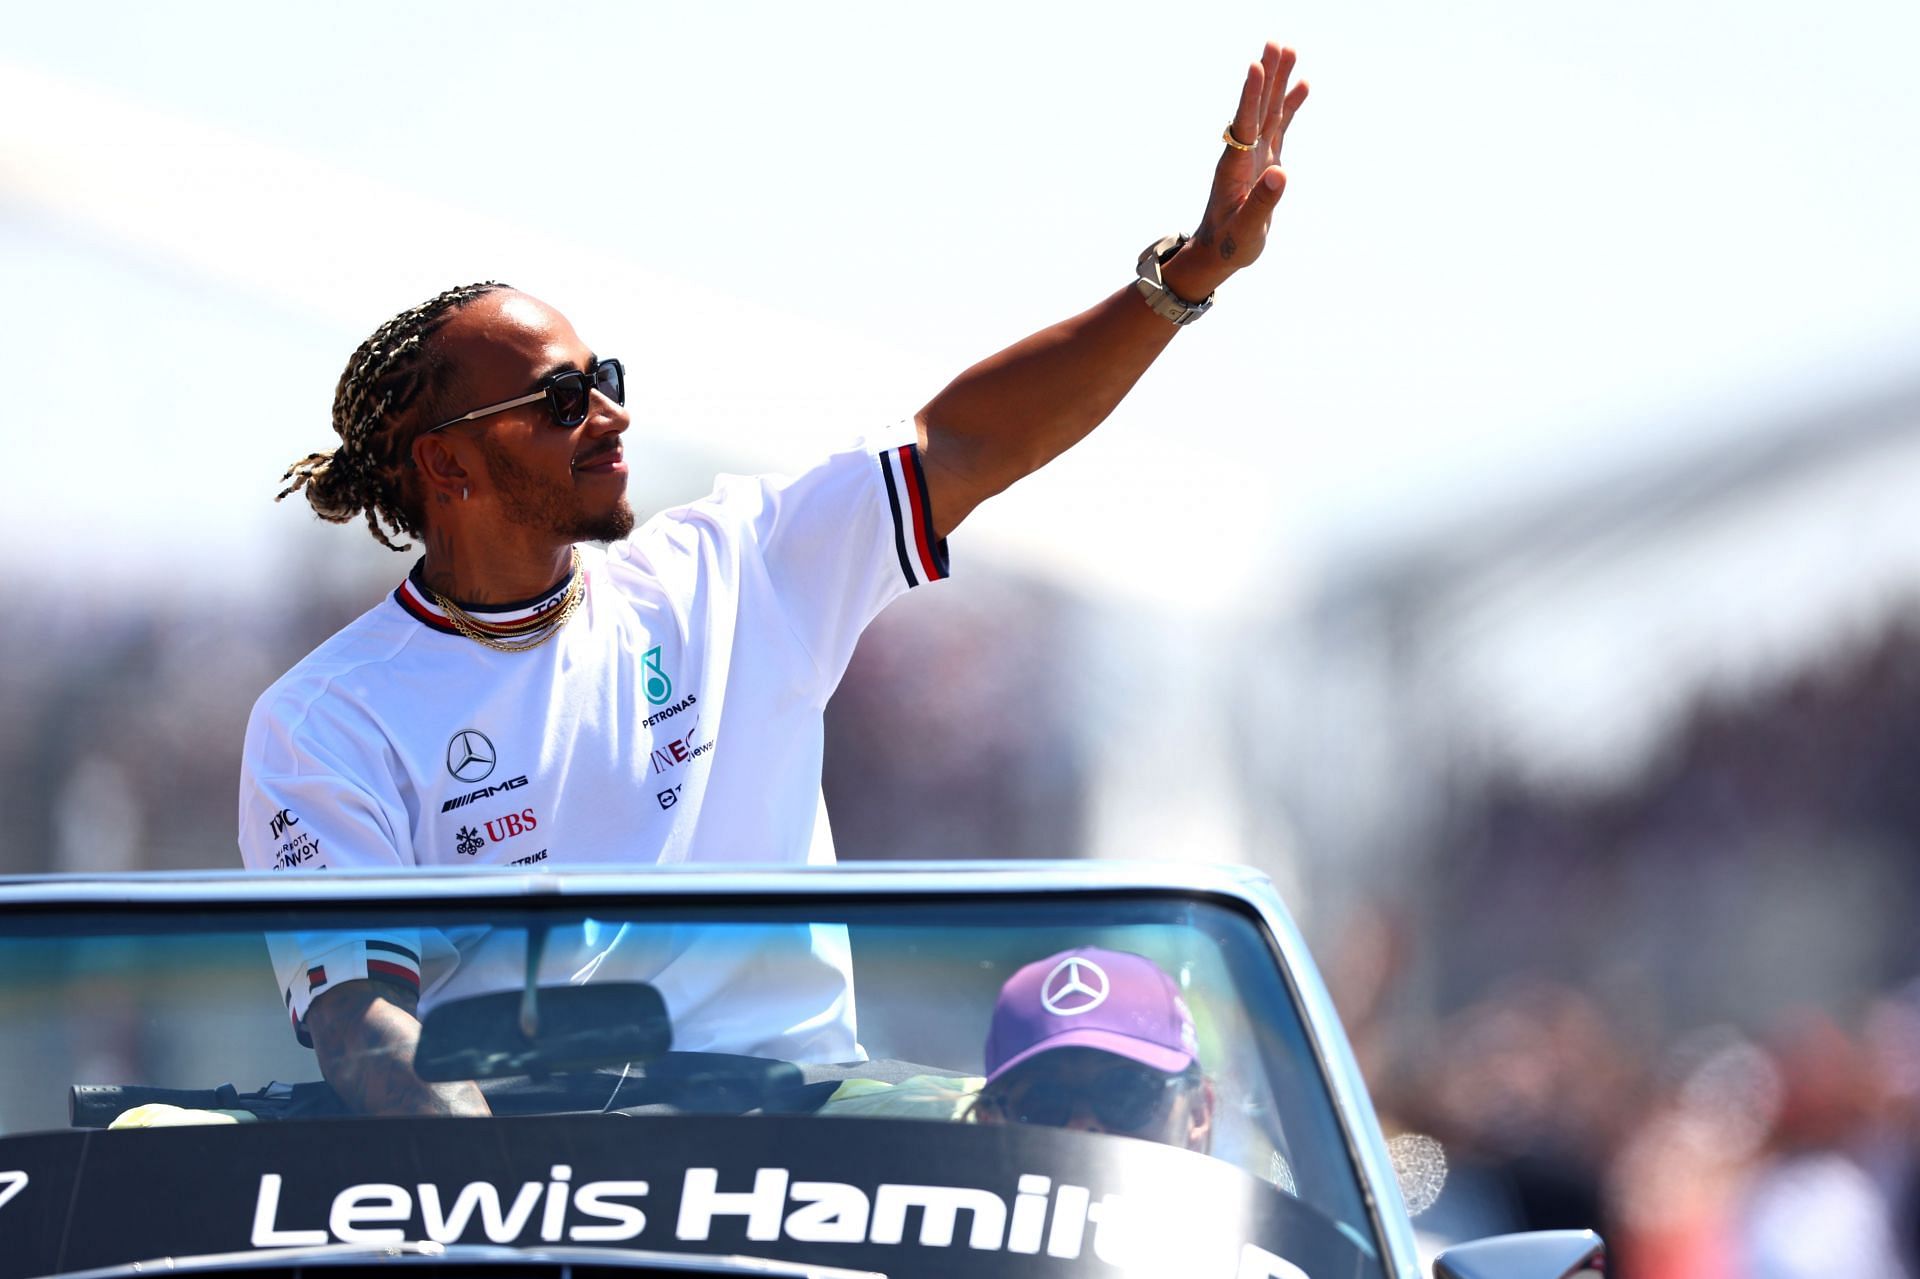 Lewis Hamilton fans are still angry about what happened last season